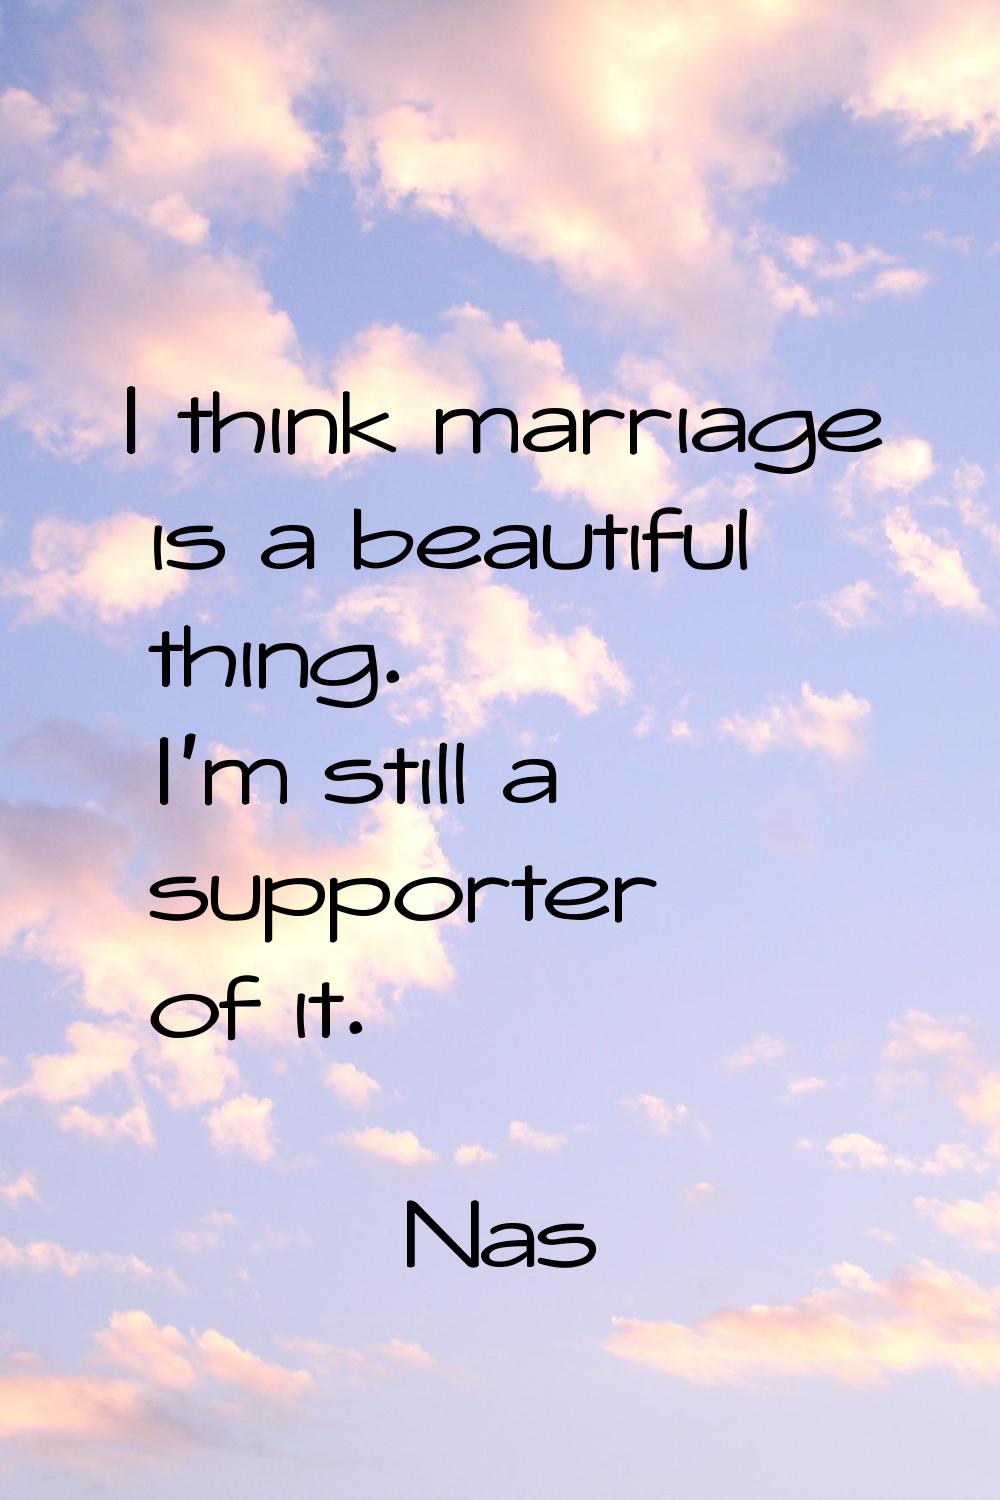 I think marriage is a beautiful thing. I'm still a supporter of it.